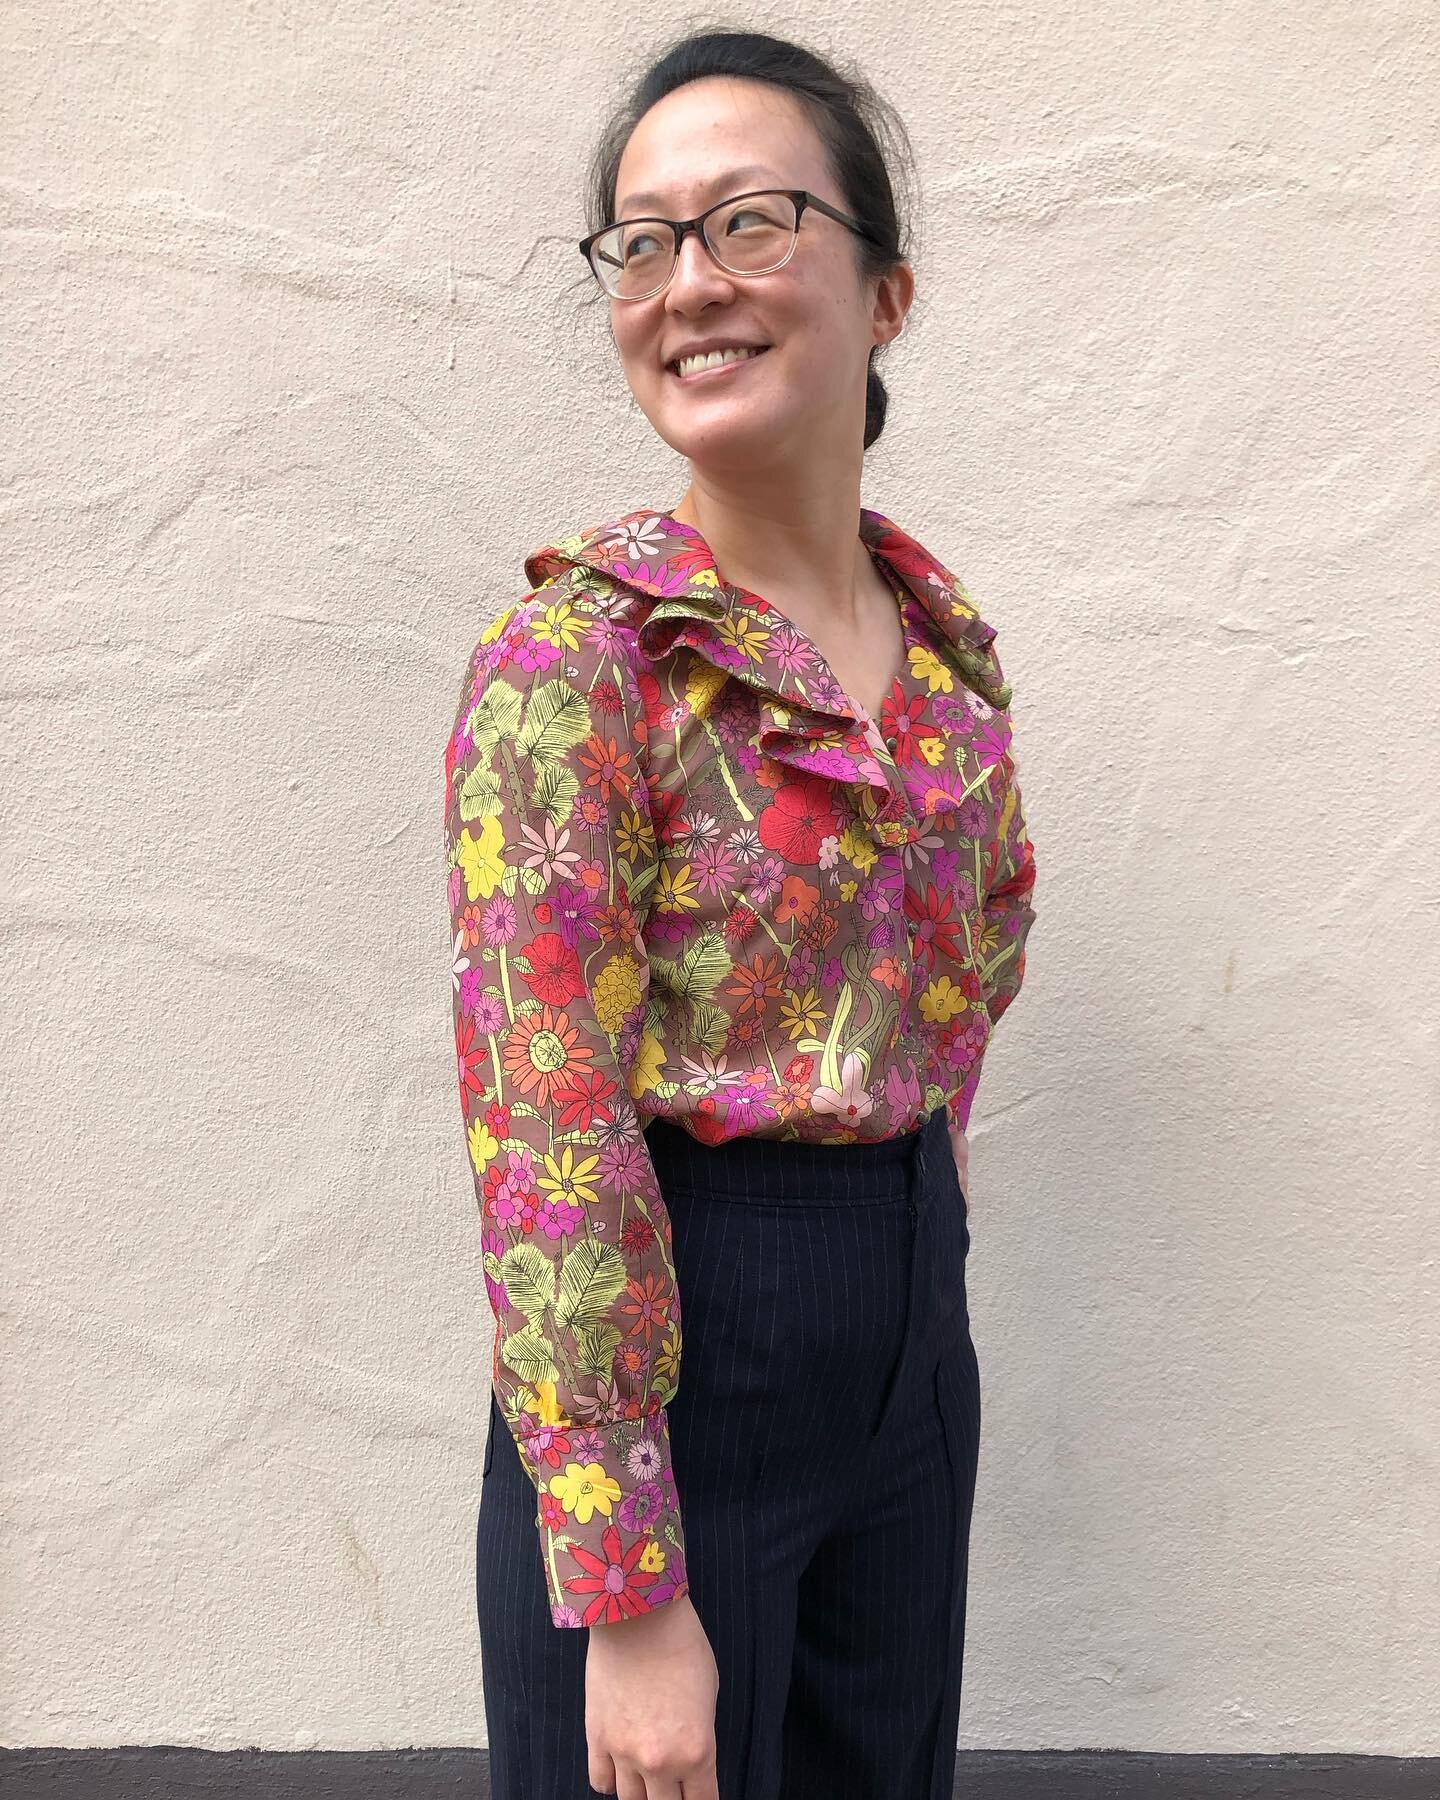 Here&rsquo;s a blouse I made! It&rsquo;s the Seamwork Danielle pattern. The fabric is a cotton/silk voile from Mood Fabrics. I made a size 8 and used brown shank buttons from my vintage button stash. 

#seamworkdanielle #seamwork